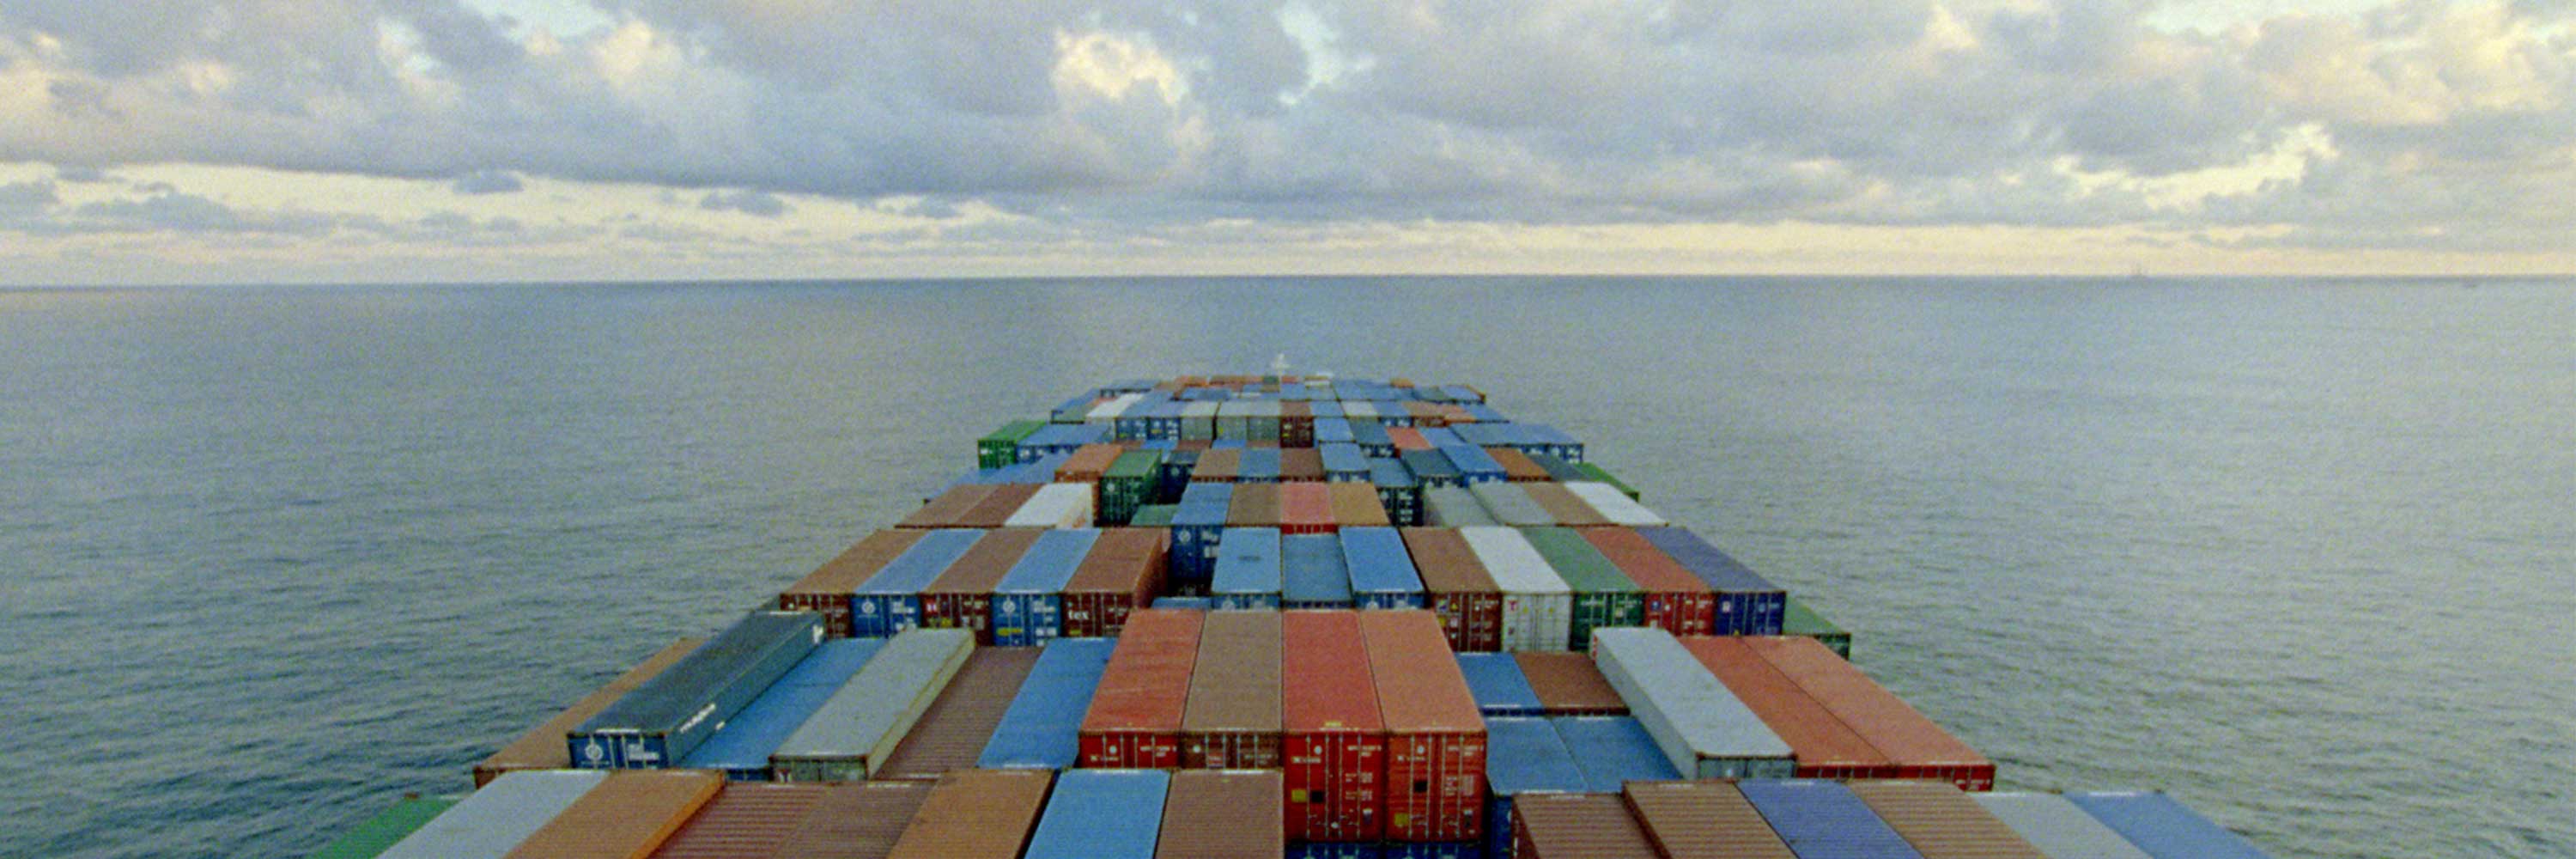 A group of different colored shipping containers near water under a cloudy sky.